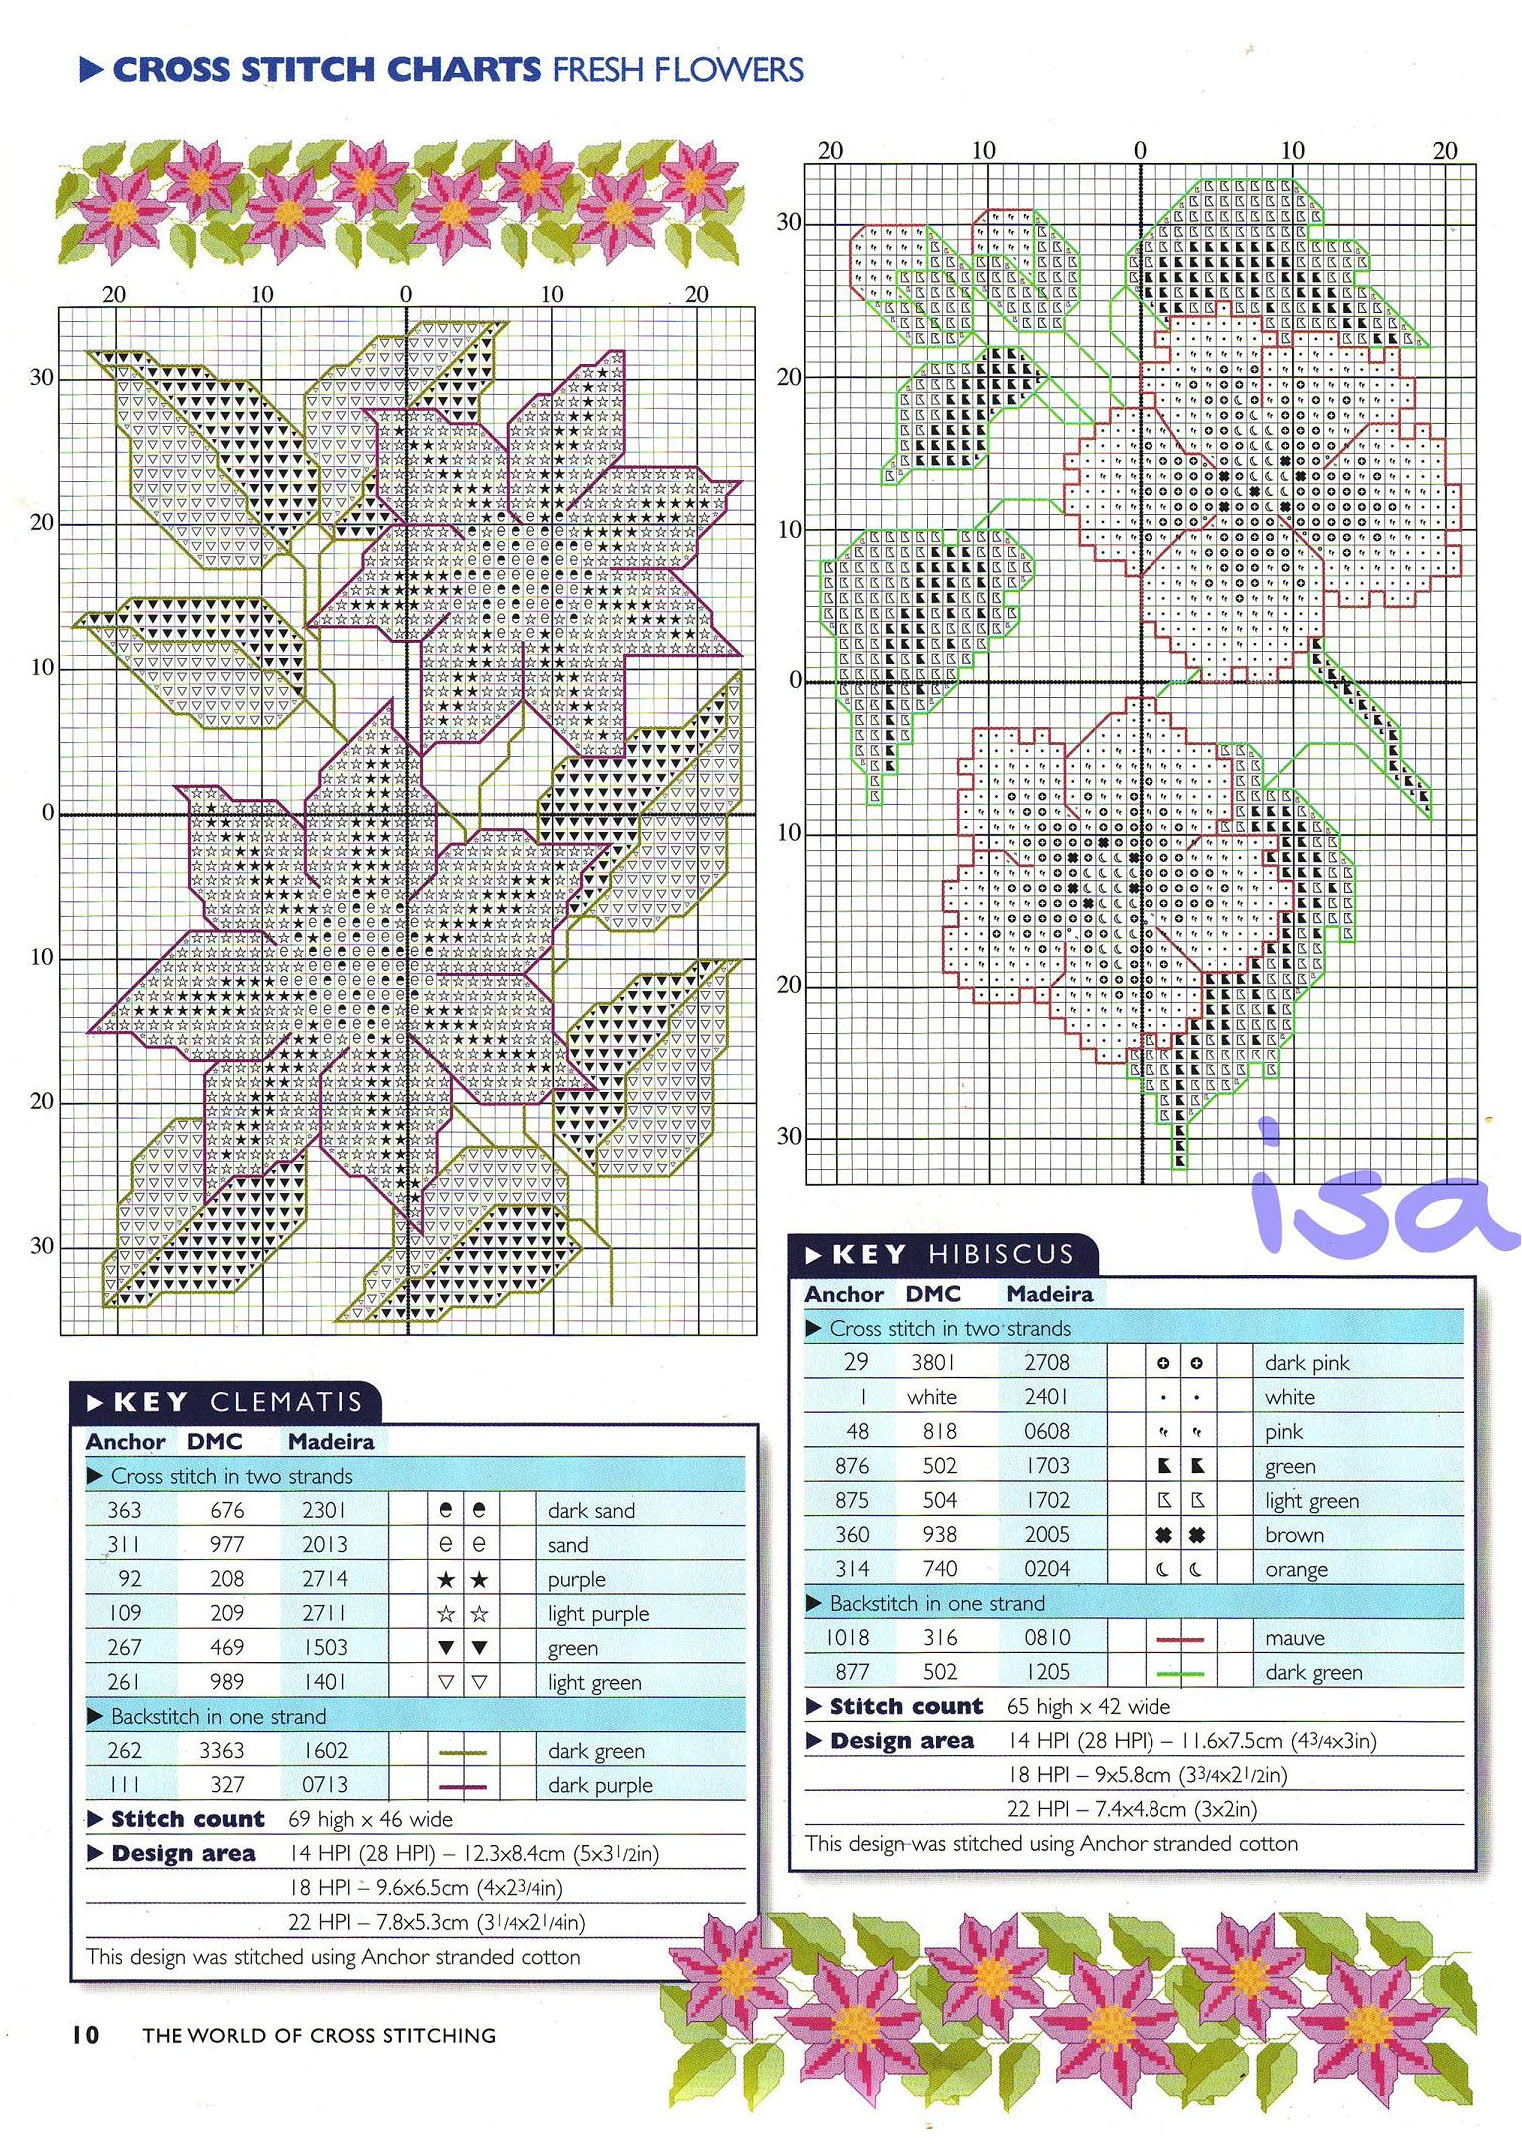 Clematis and Ibiscus flower cross stitch pattern